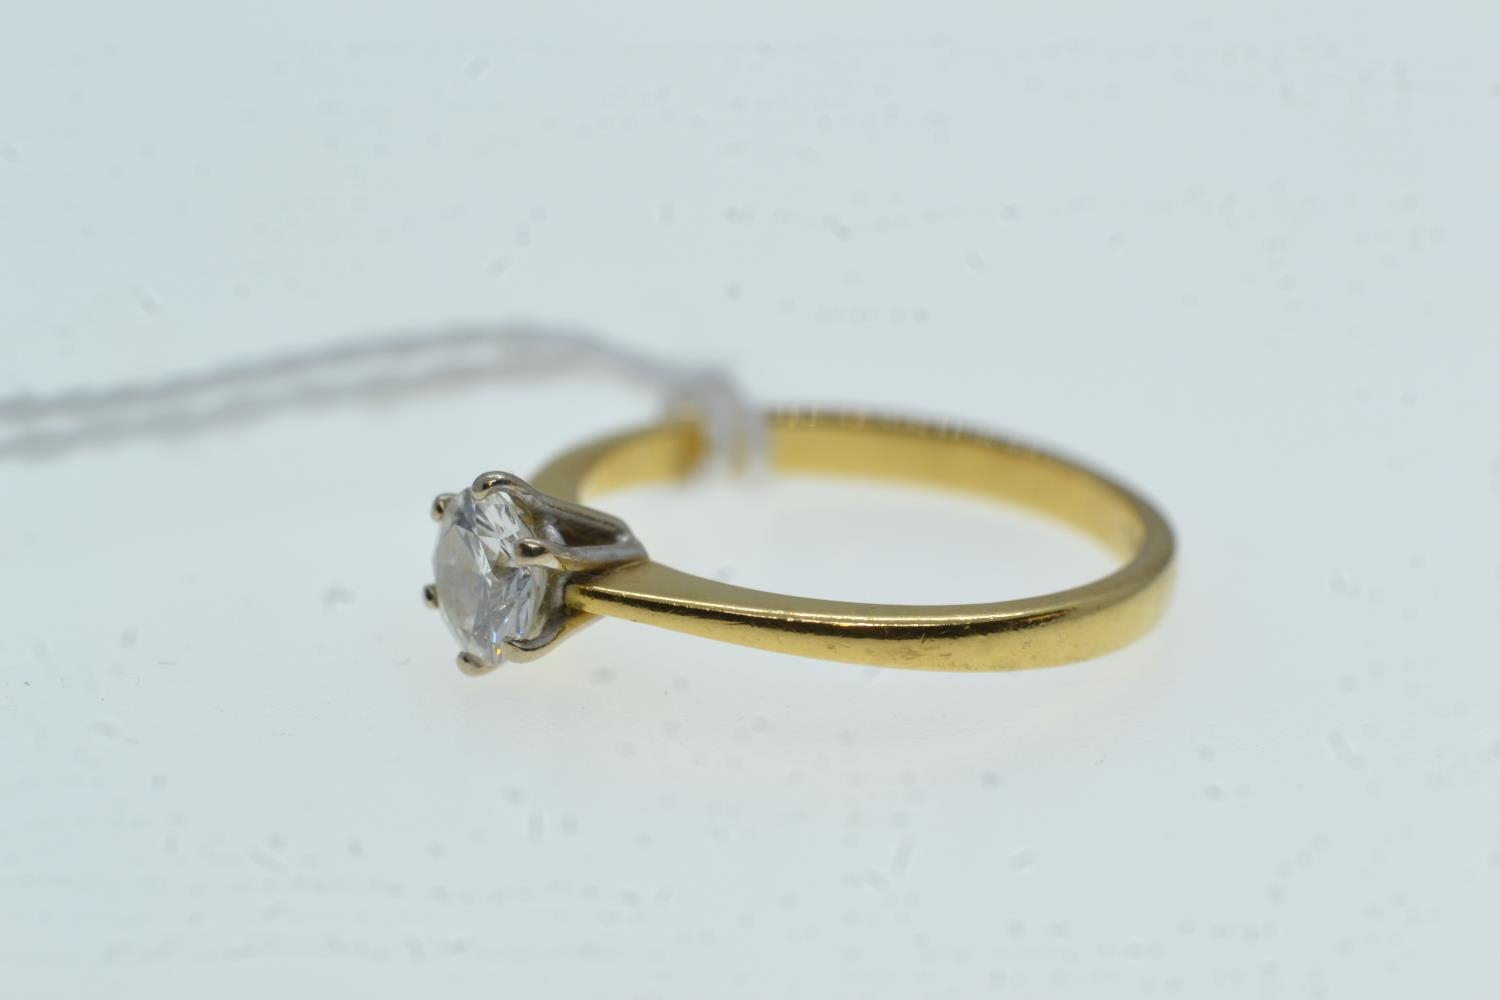 18ct gold & 0.43 carat diamond soliataire ring, size J, 2.09 grams  Accompanied by a GIA certificate - Image 3 of 5